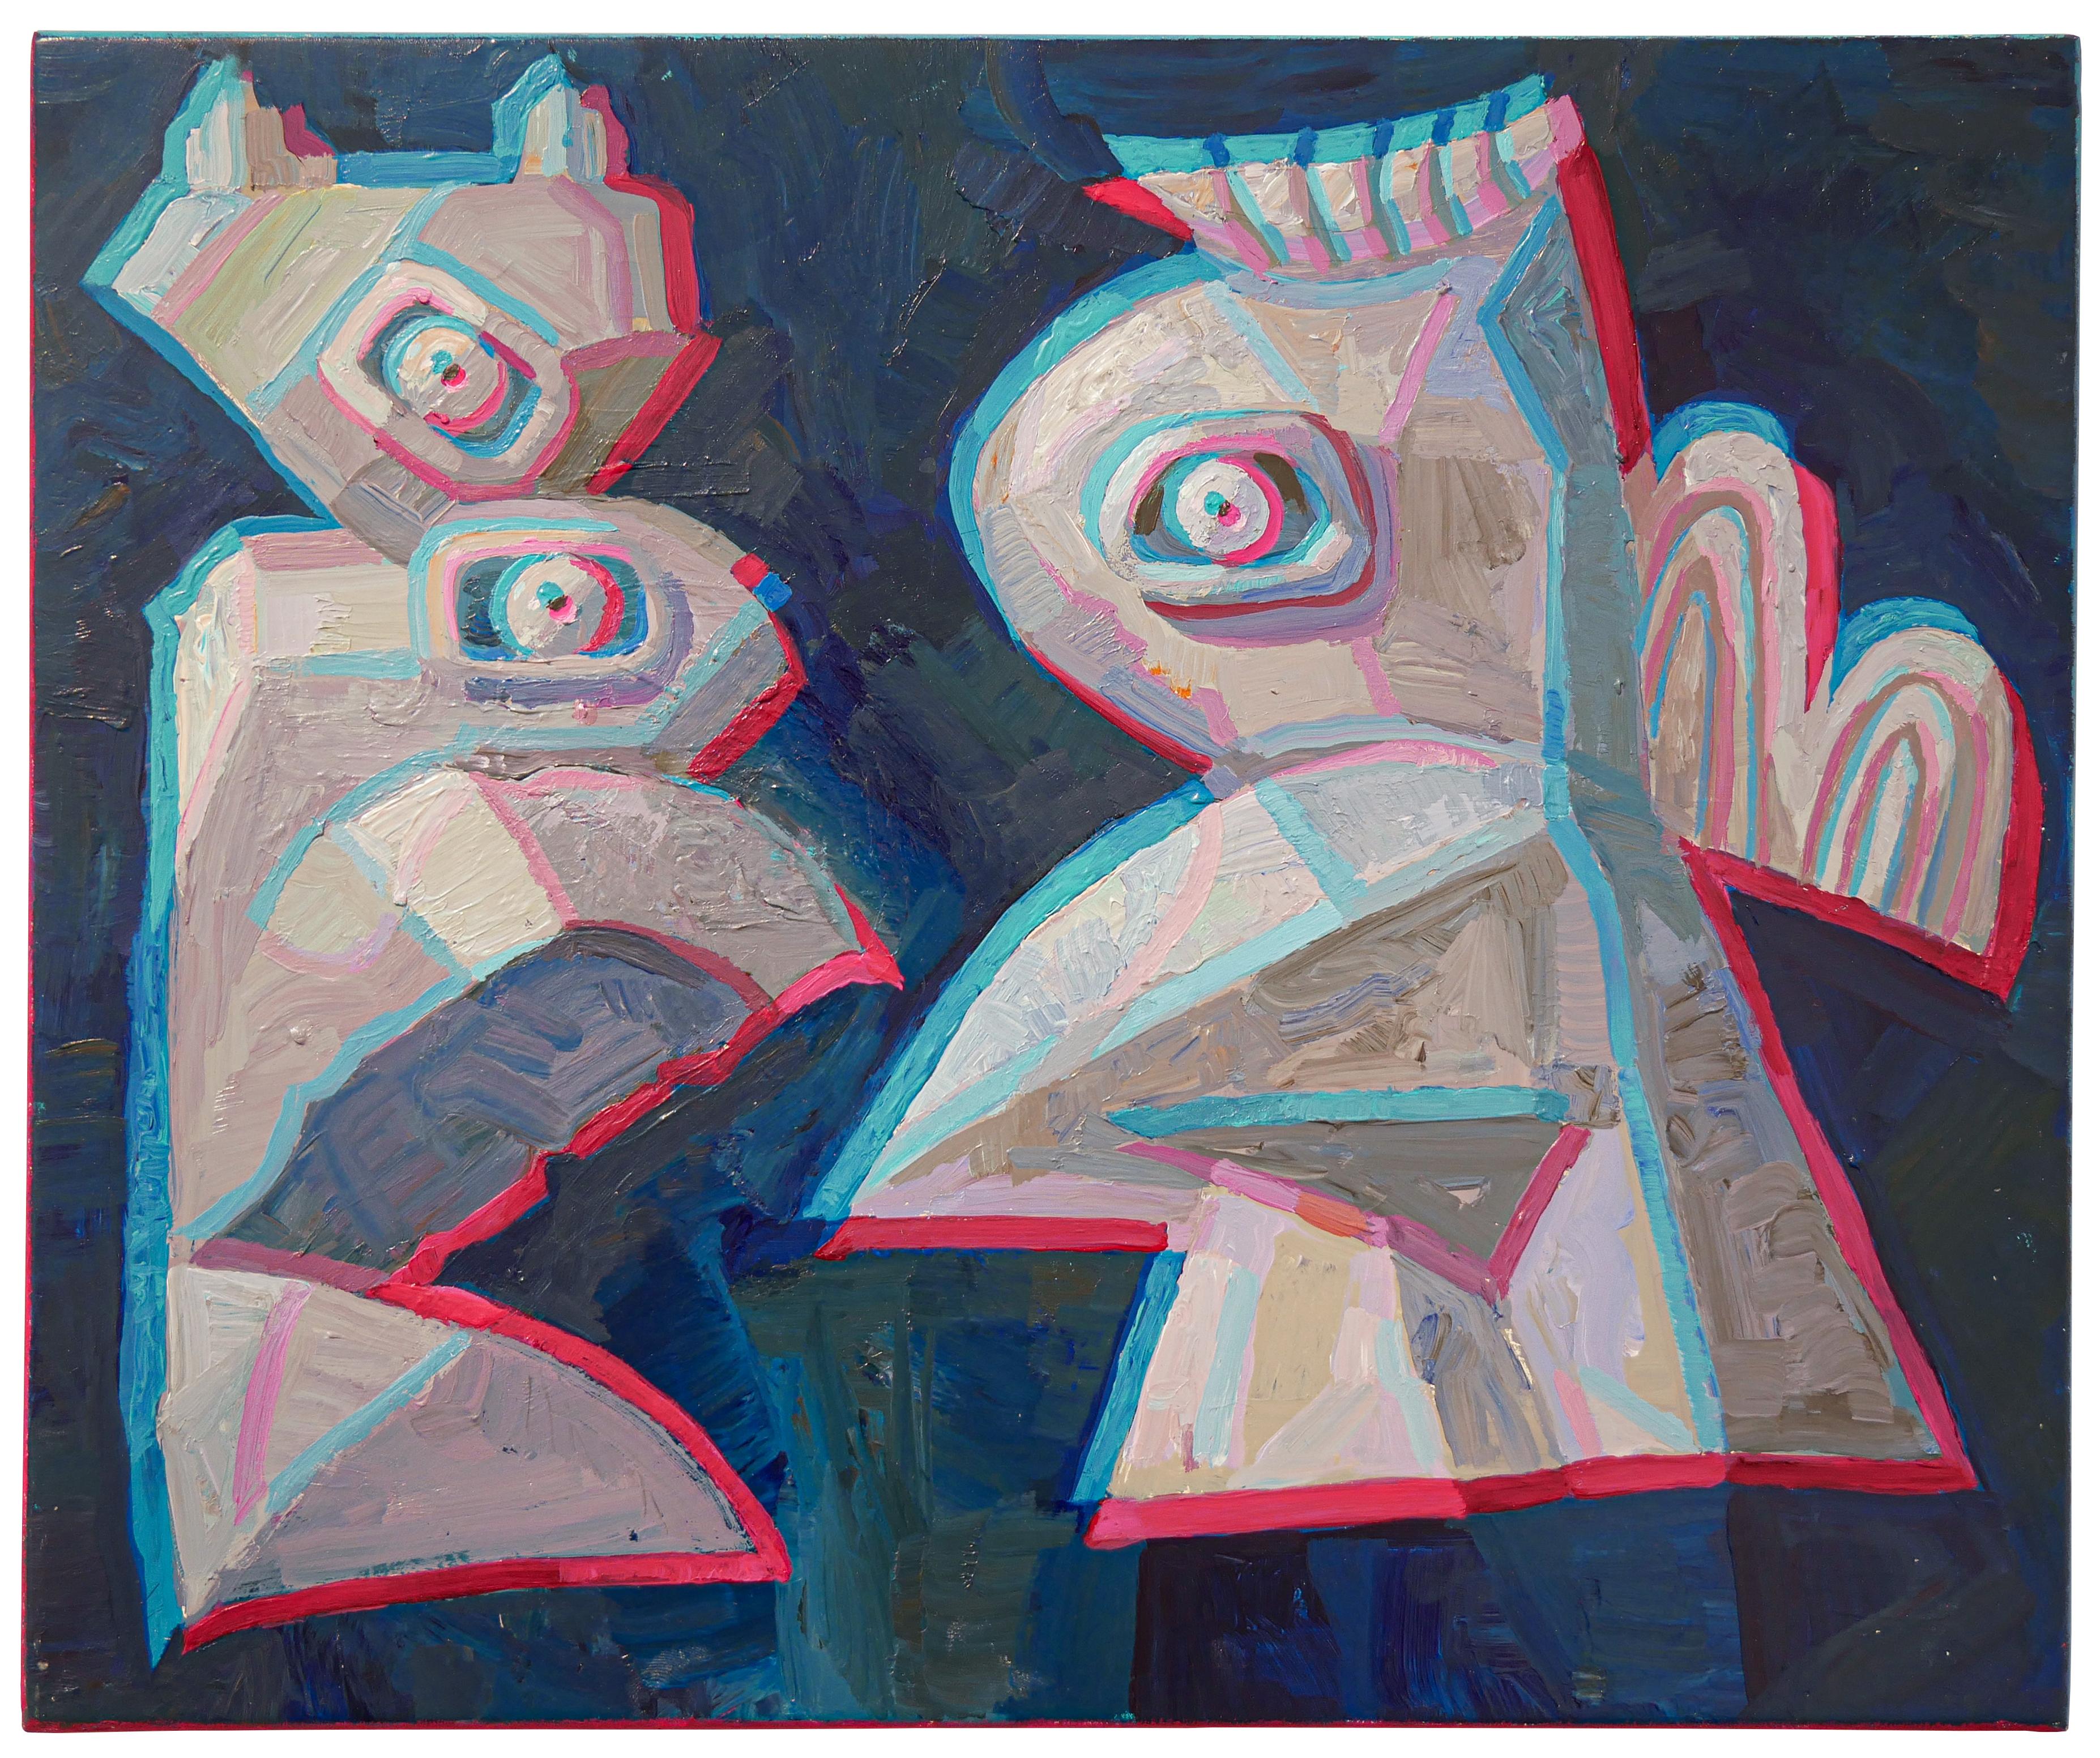 Robert MacKenzie Figurative Painting - "Untitled" Dark Blue, Neon Pink, and White Anaglyph Painting